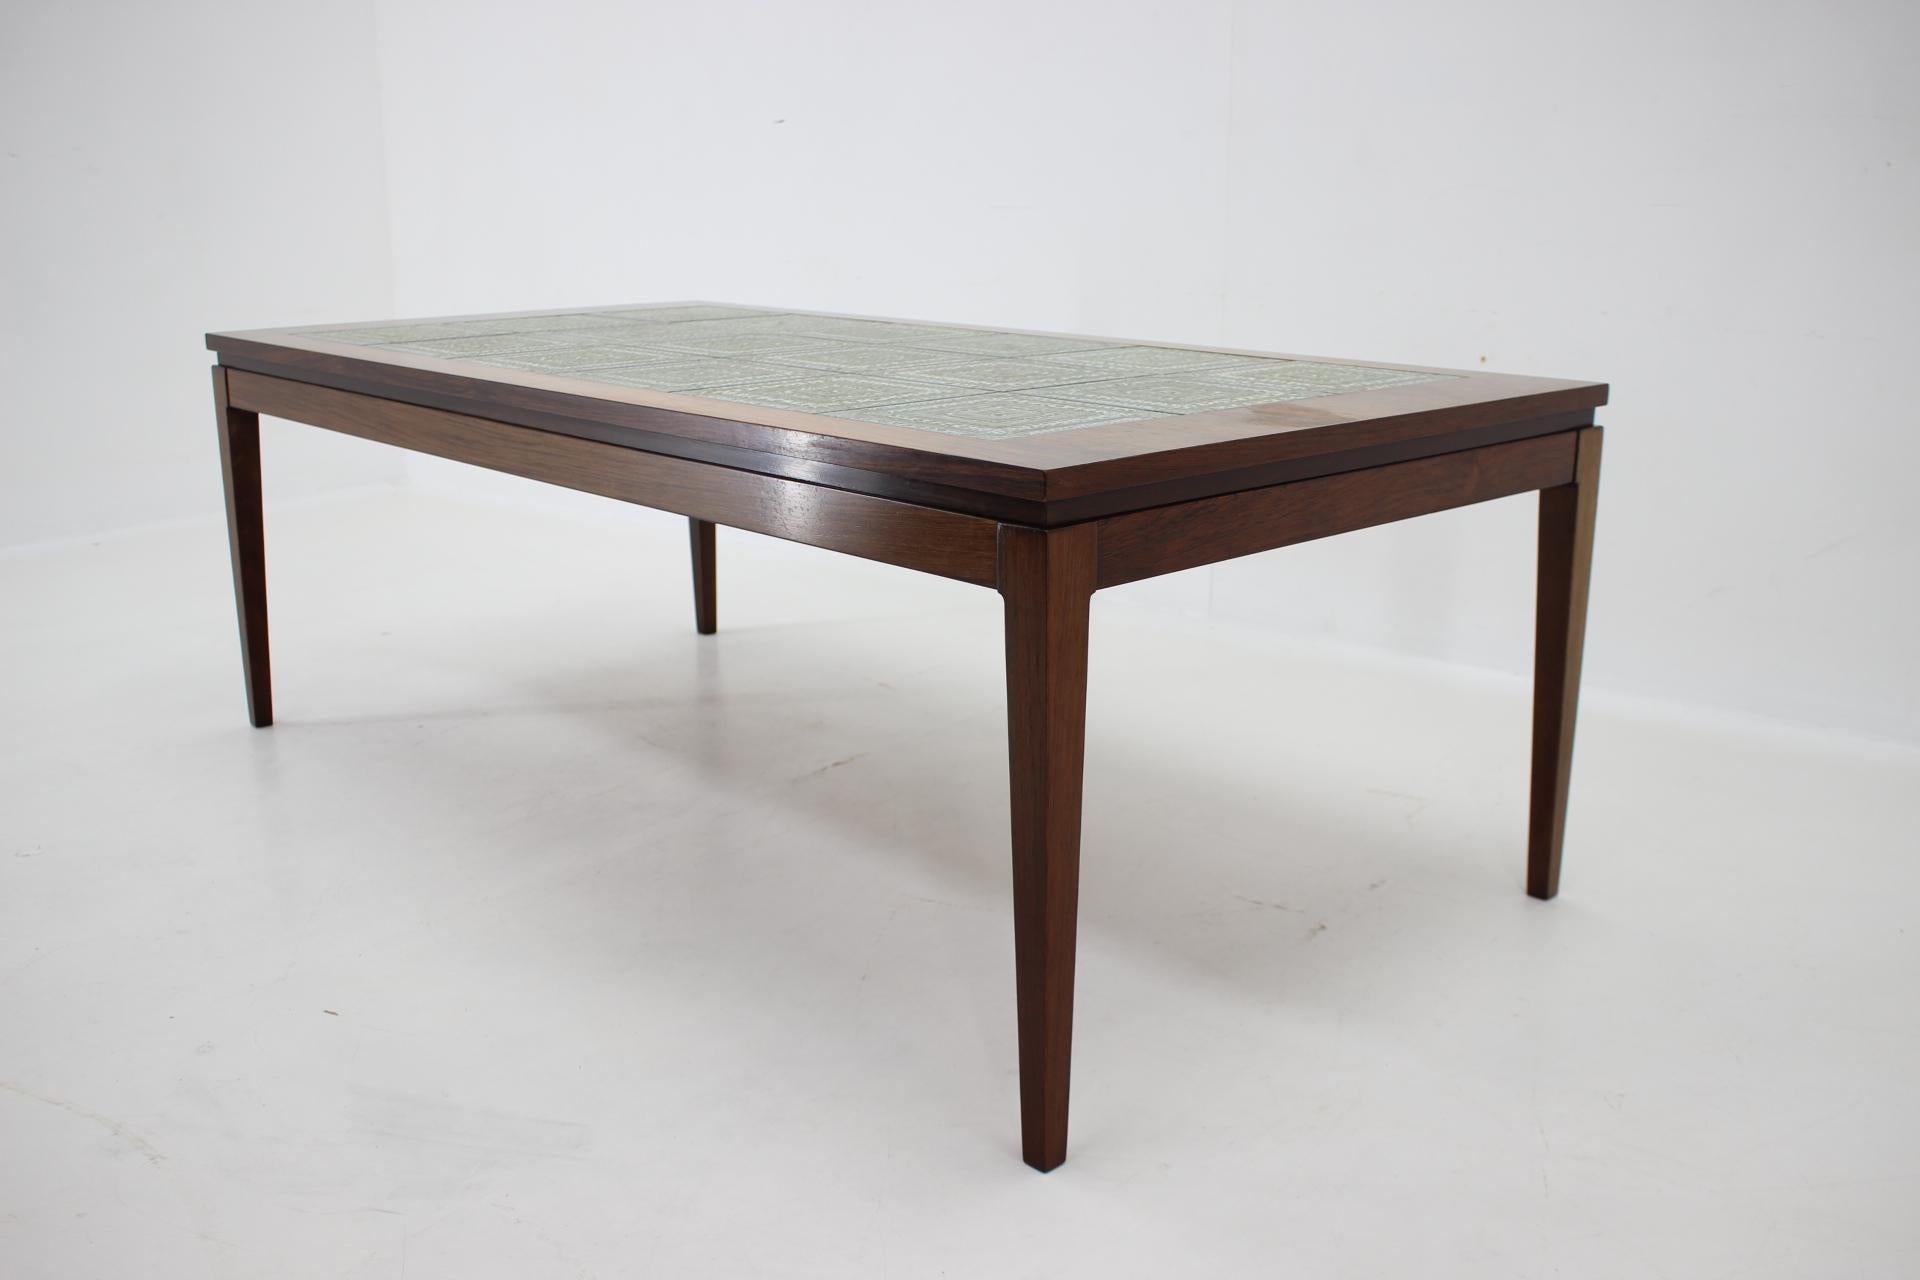 1960s Palisander and Tile Coffee Table, Denmark In Good Condition For Sale In Praha, CZ